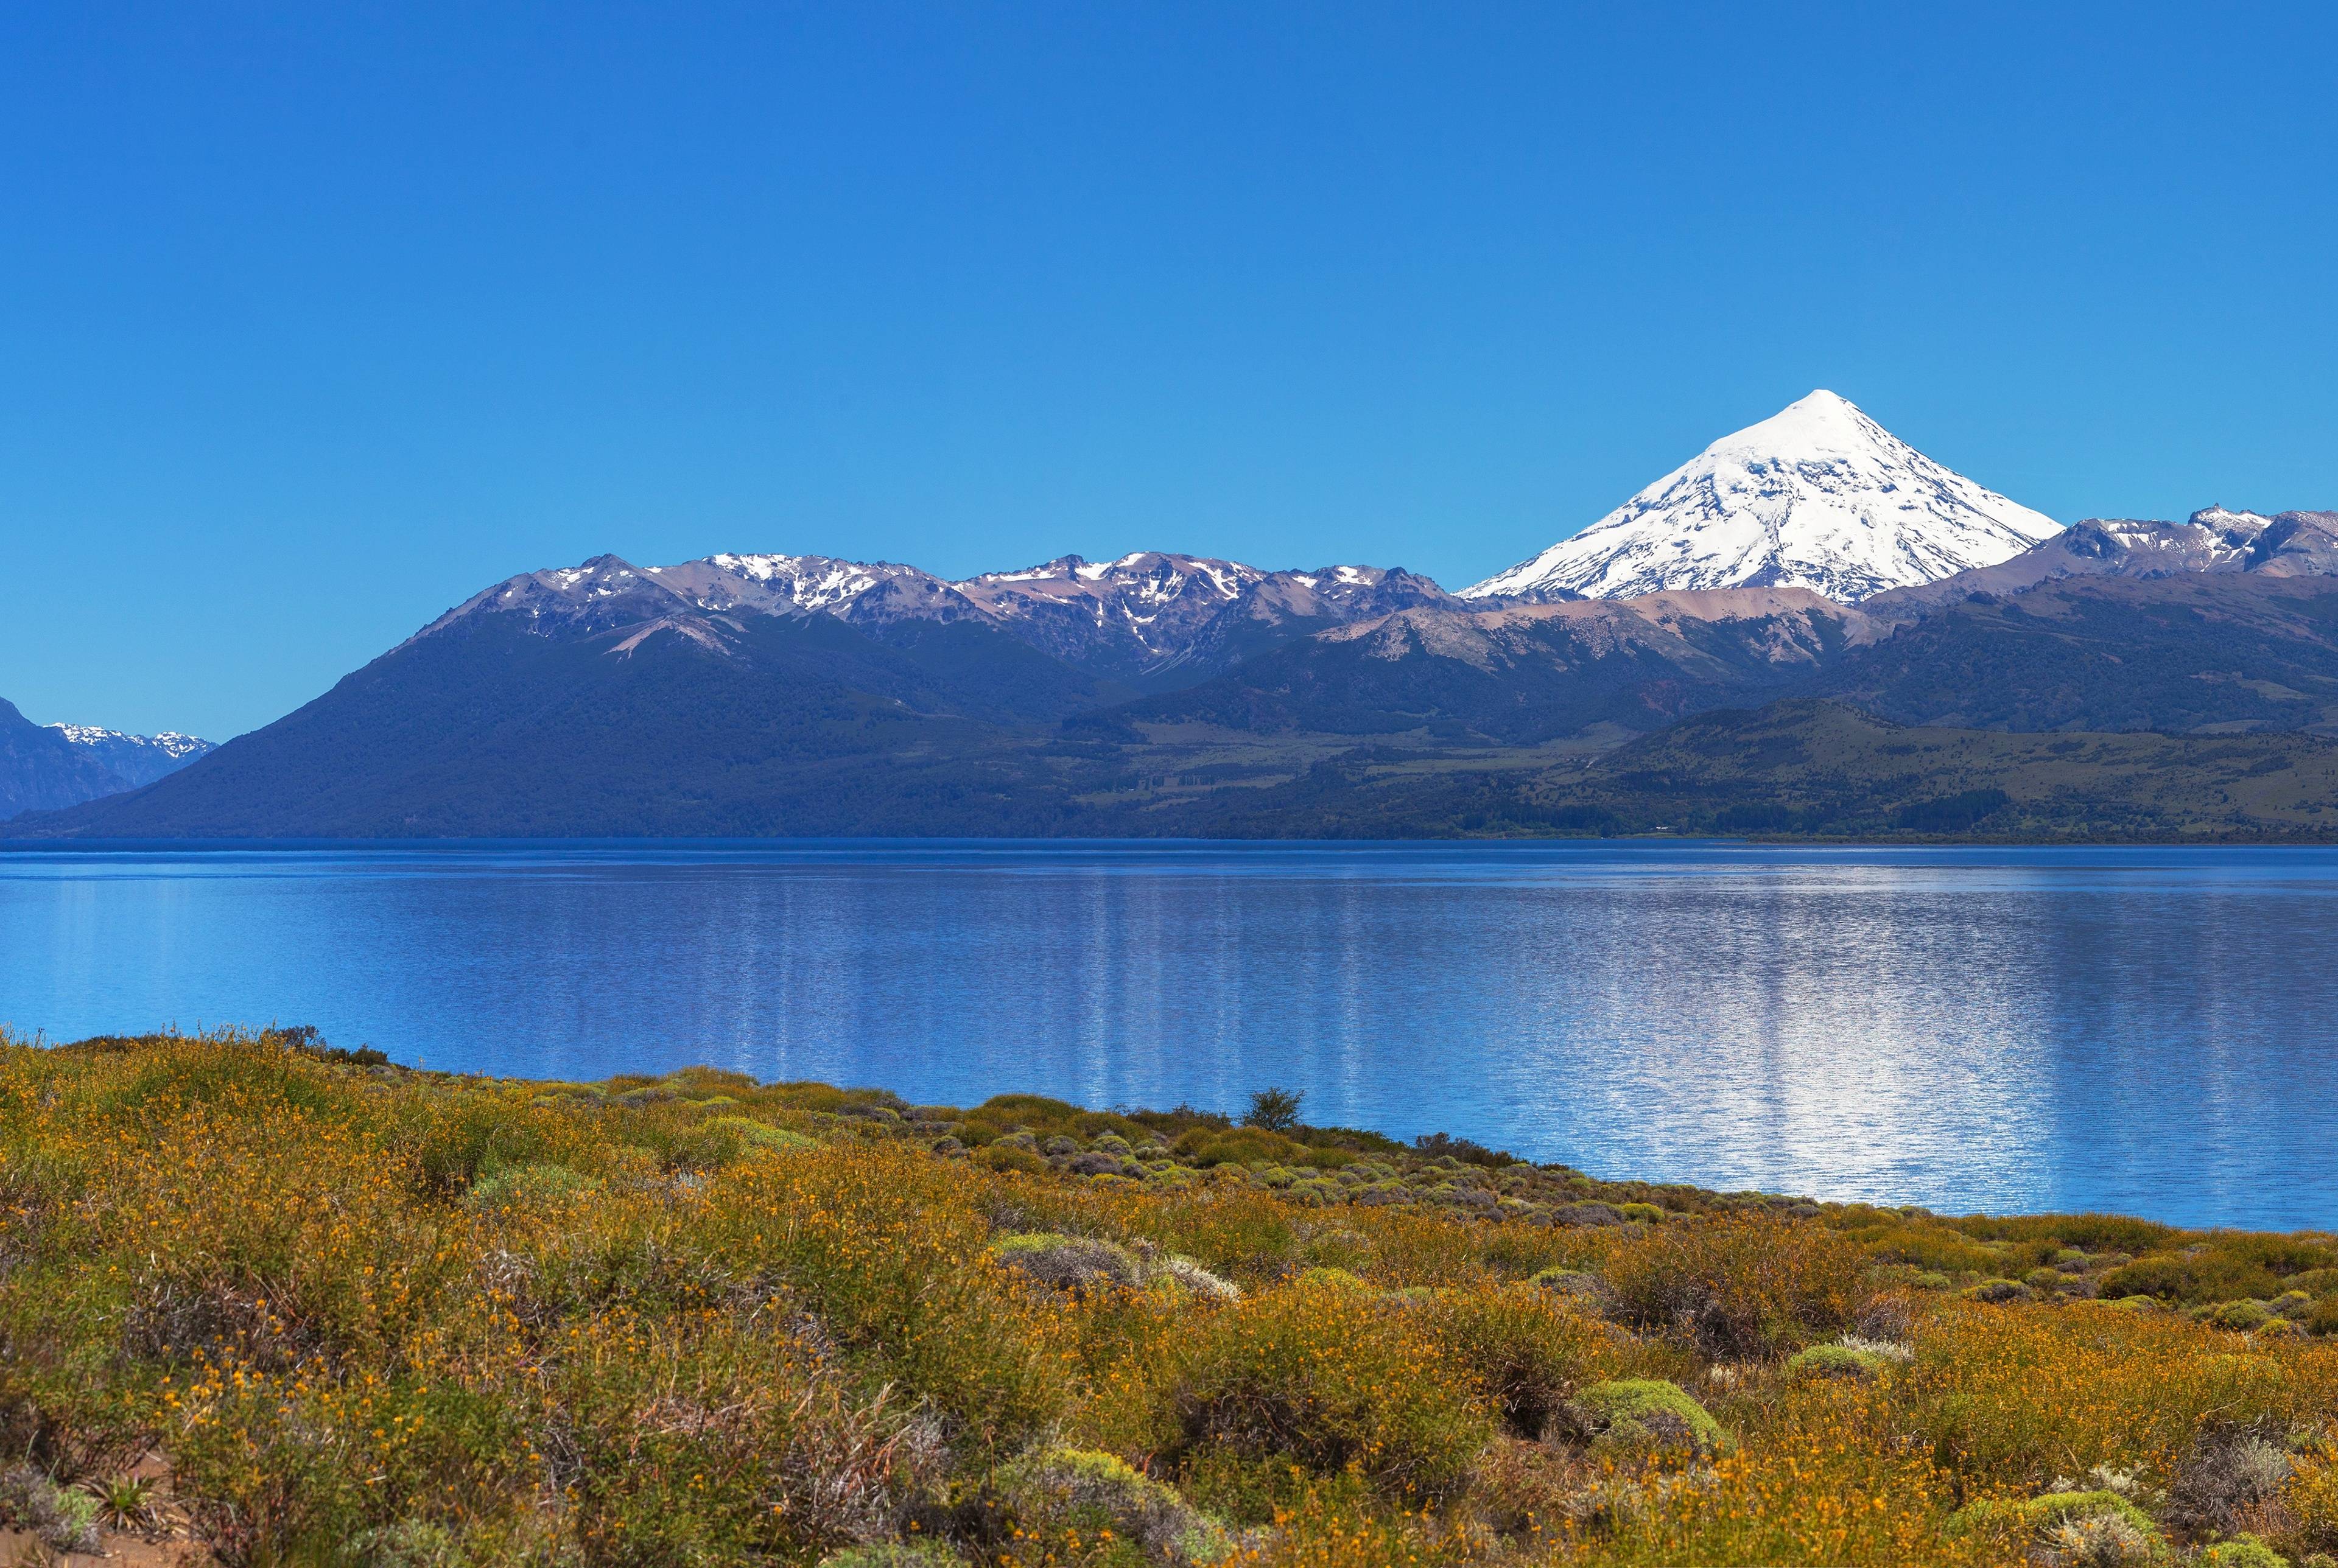 Get Amazed by the Mountains, Lakes and Volcanoes in Patagonia Argentina